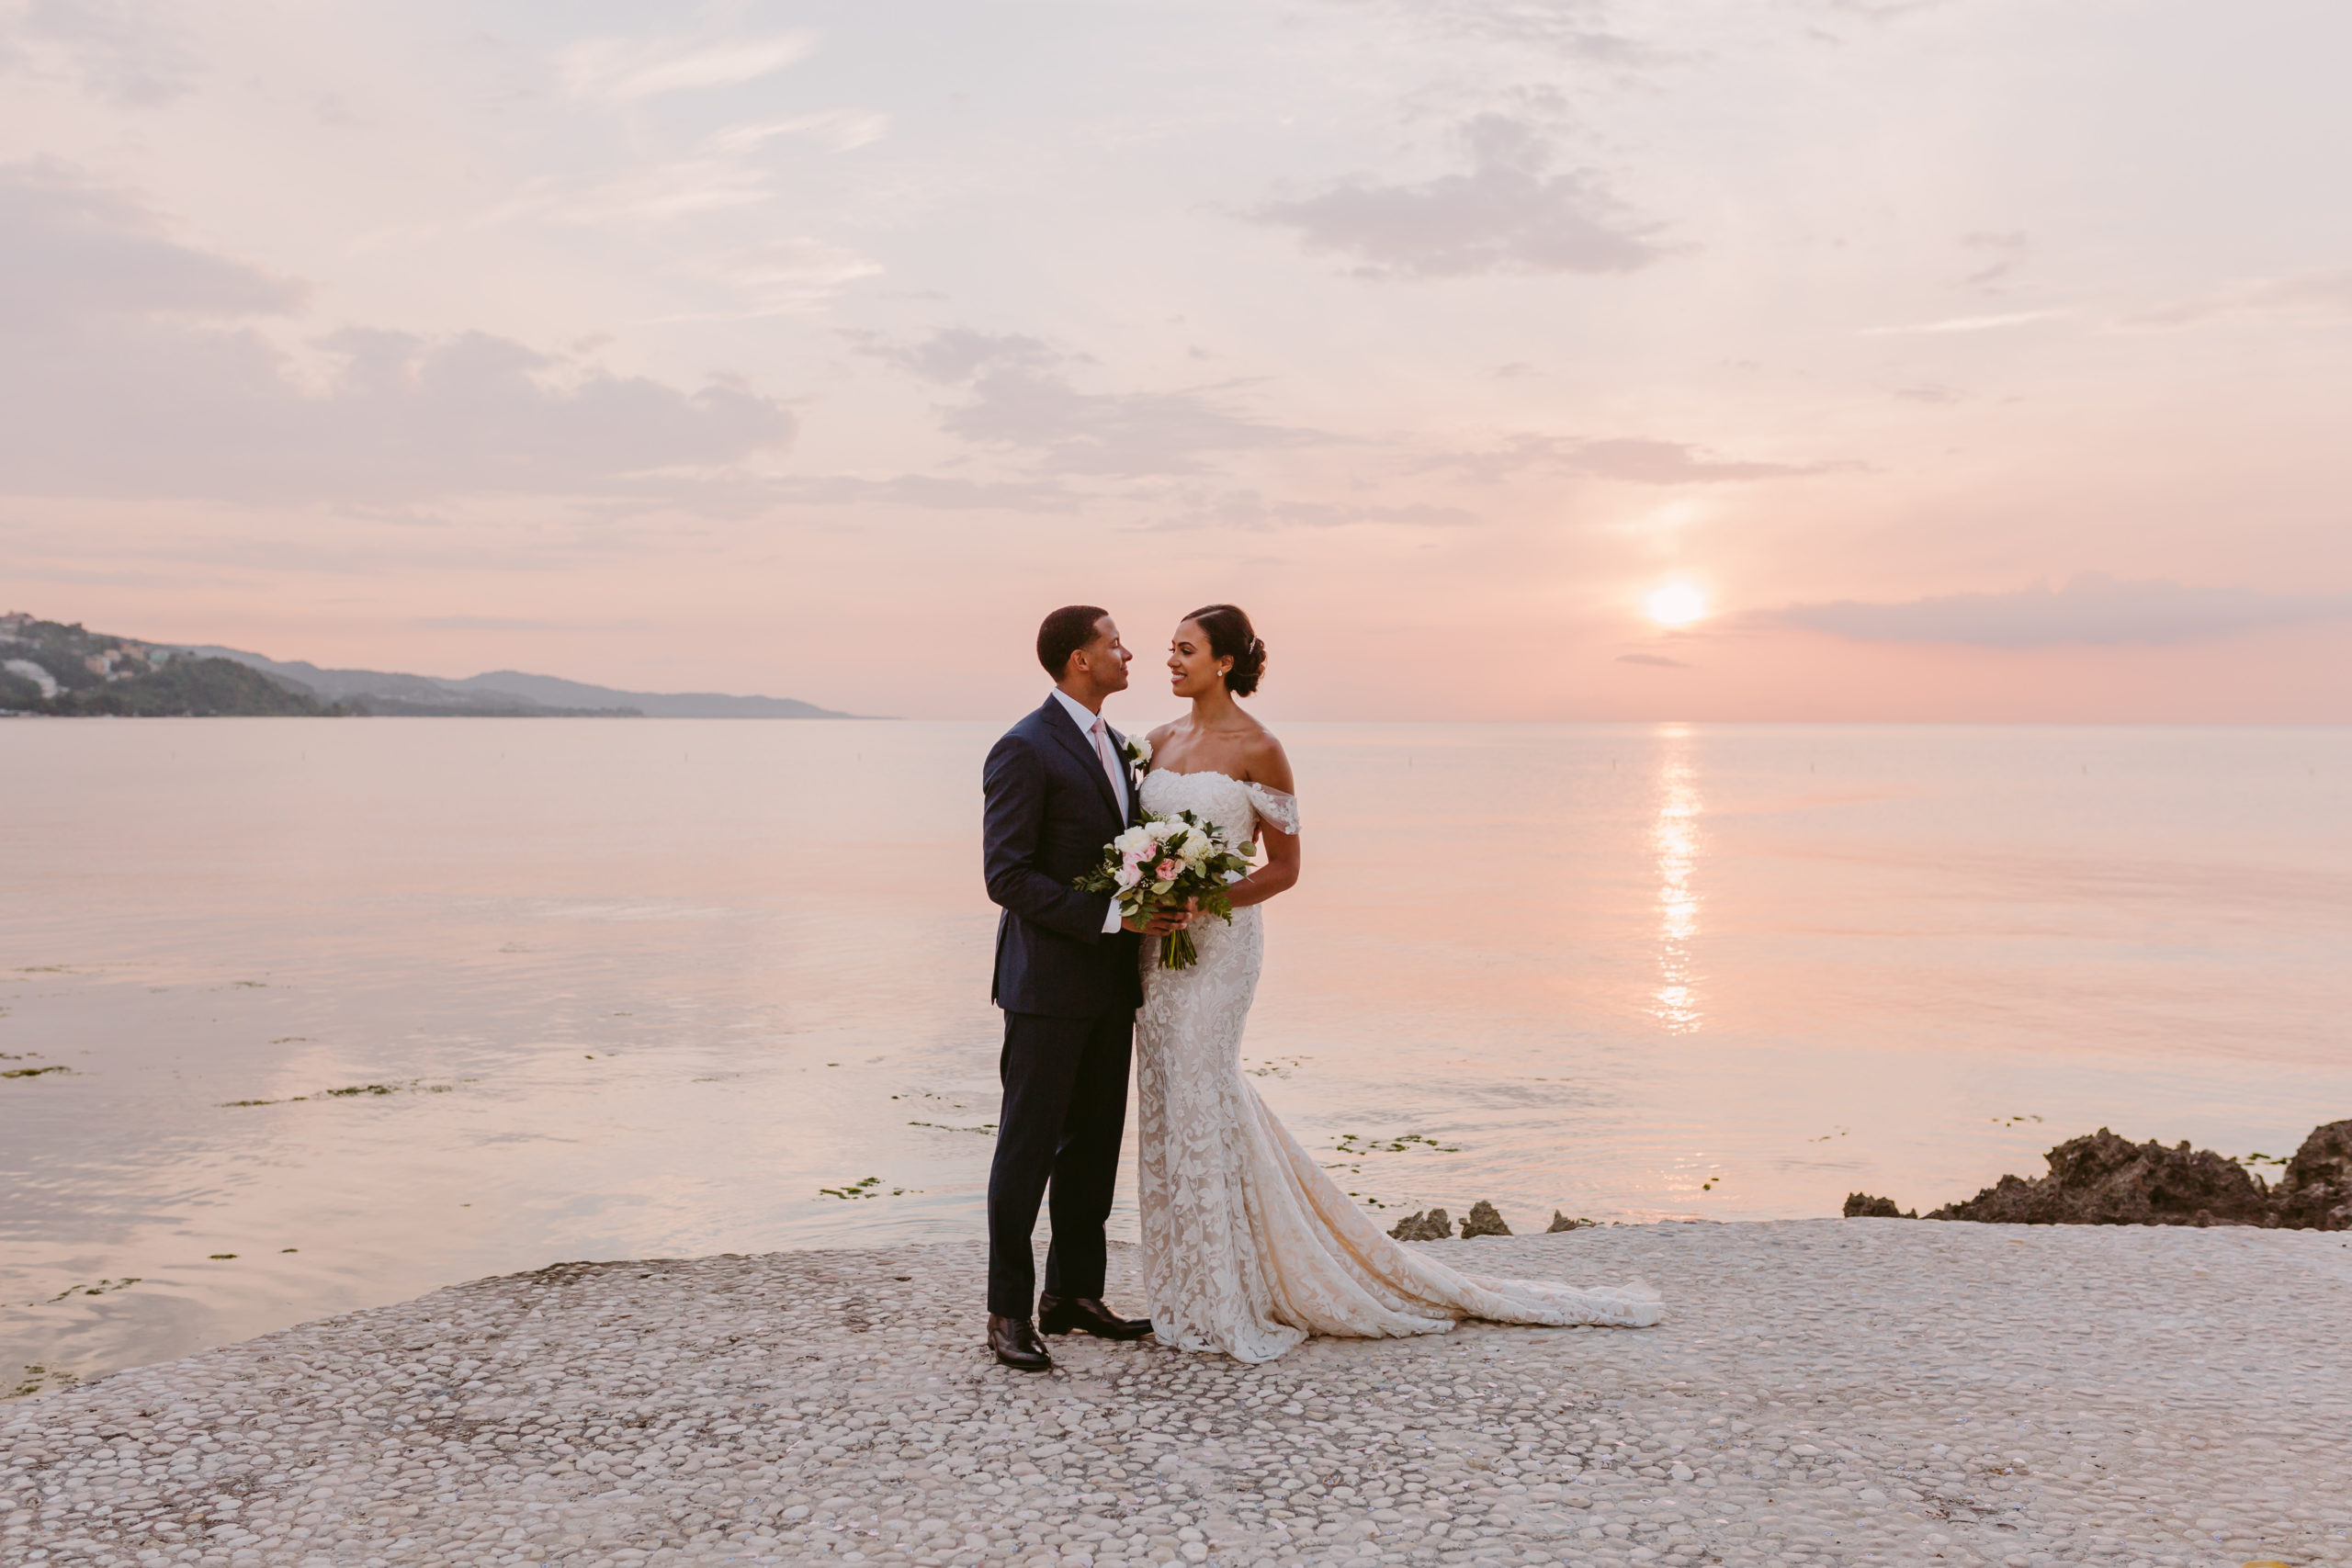 Errol Barnett & Ariana Tolbert stand on the shore of Montego Bay smiling at each other. Image by Victoria Heer, fine art wedding photographer.